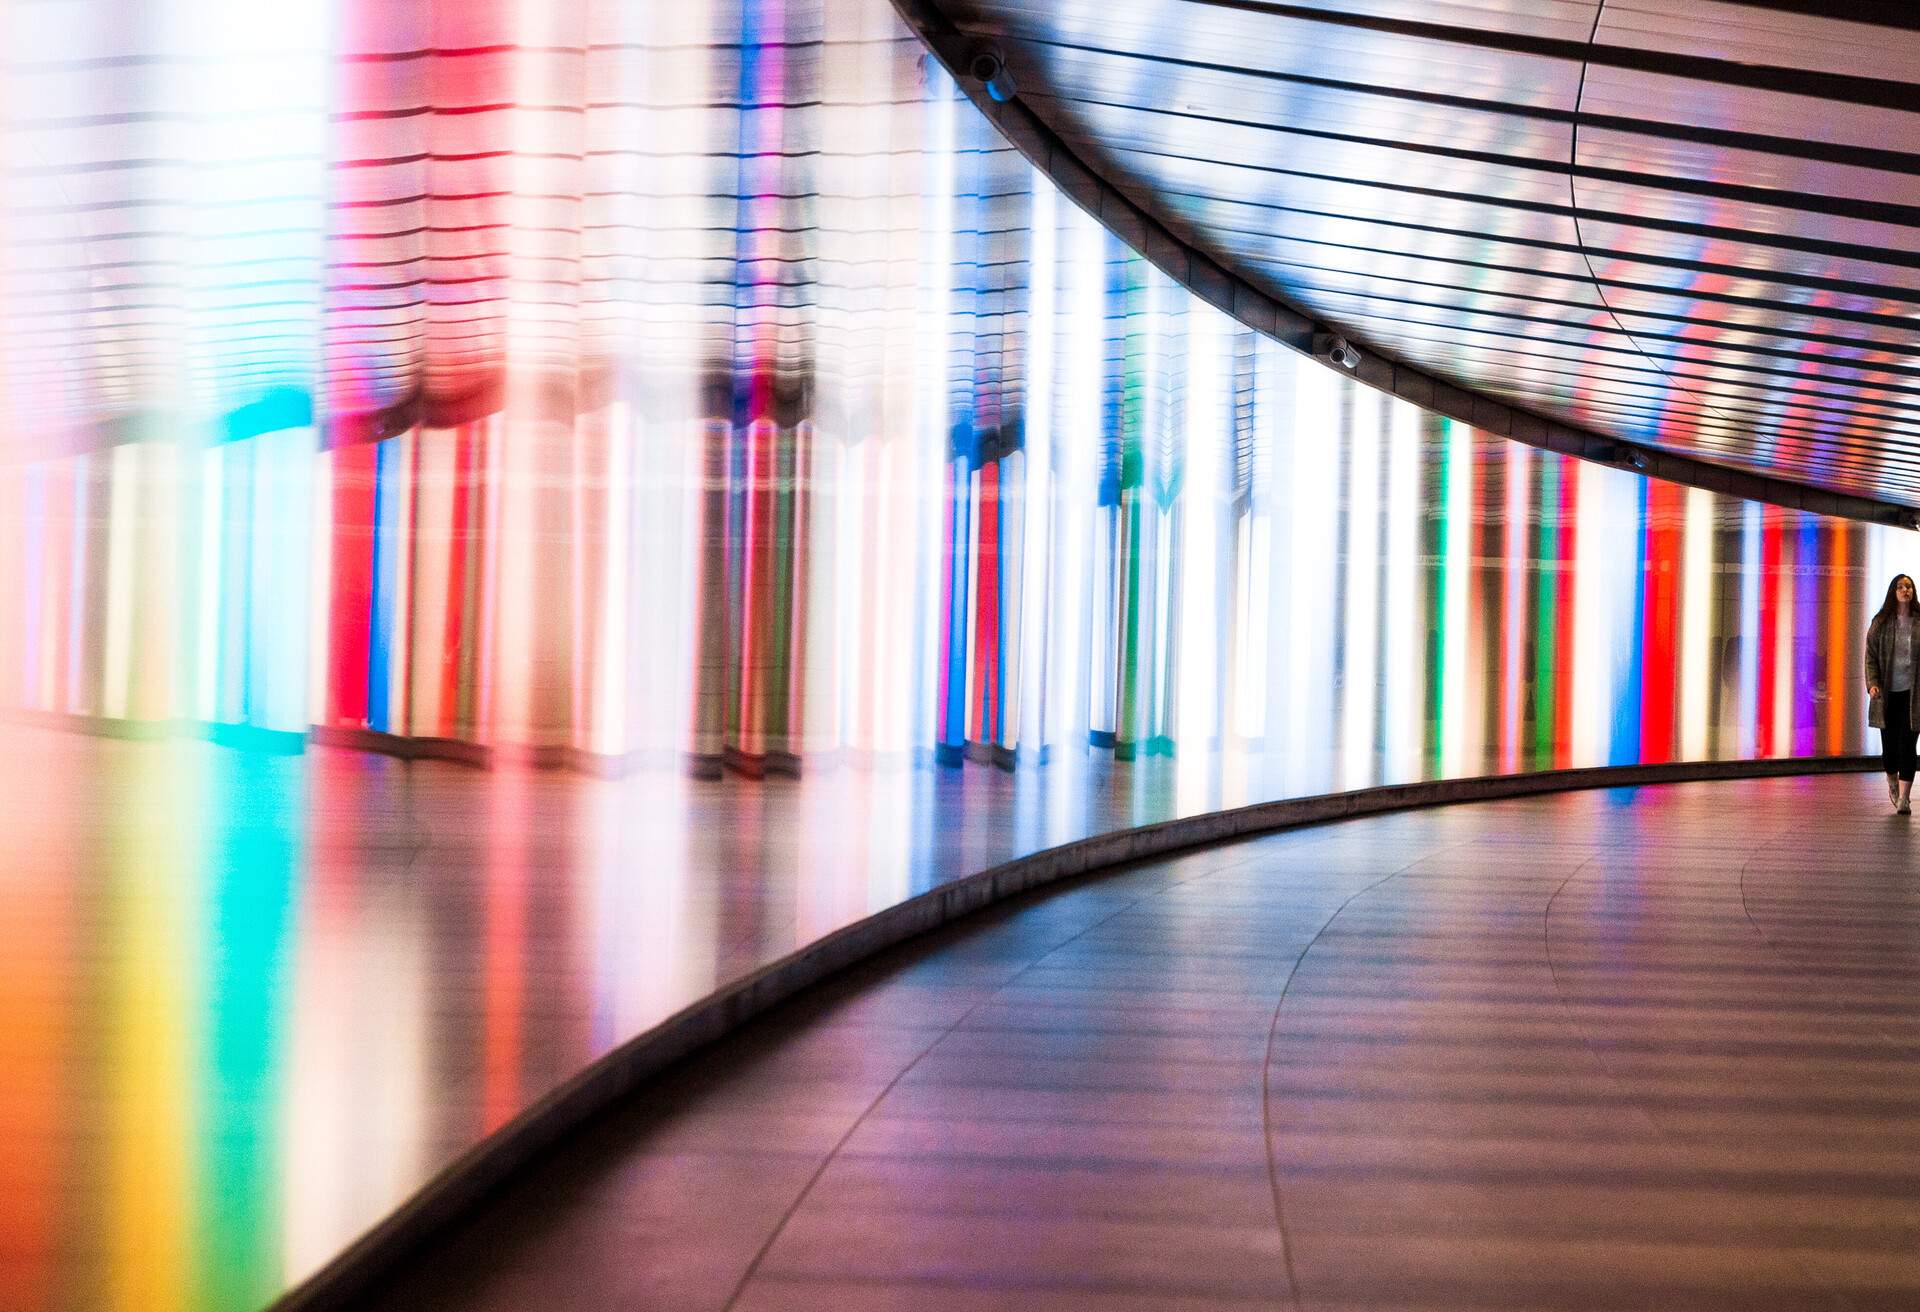 Wide angle color image depicting the front view of a young woman walking through a futuristic subway tunnel in central London, UK. The tunnel is illuminated with multi colored lights. The woman is in the far distance, and the focus is on the cool science fiction architecture of the subway tunnel that curves round into the distance. Room for copy space.